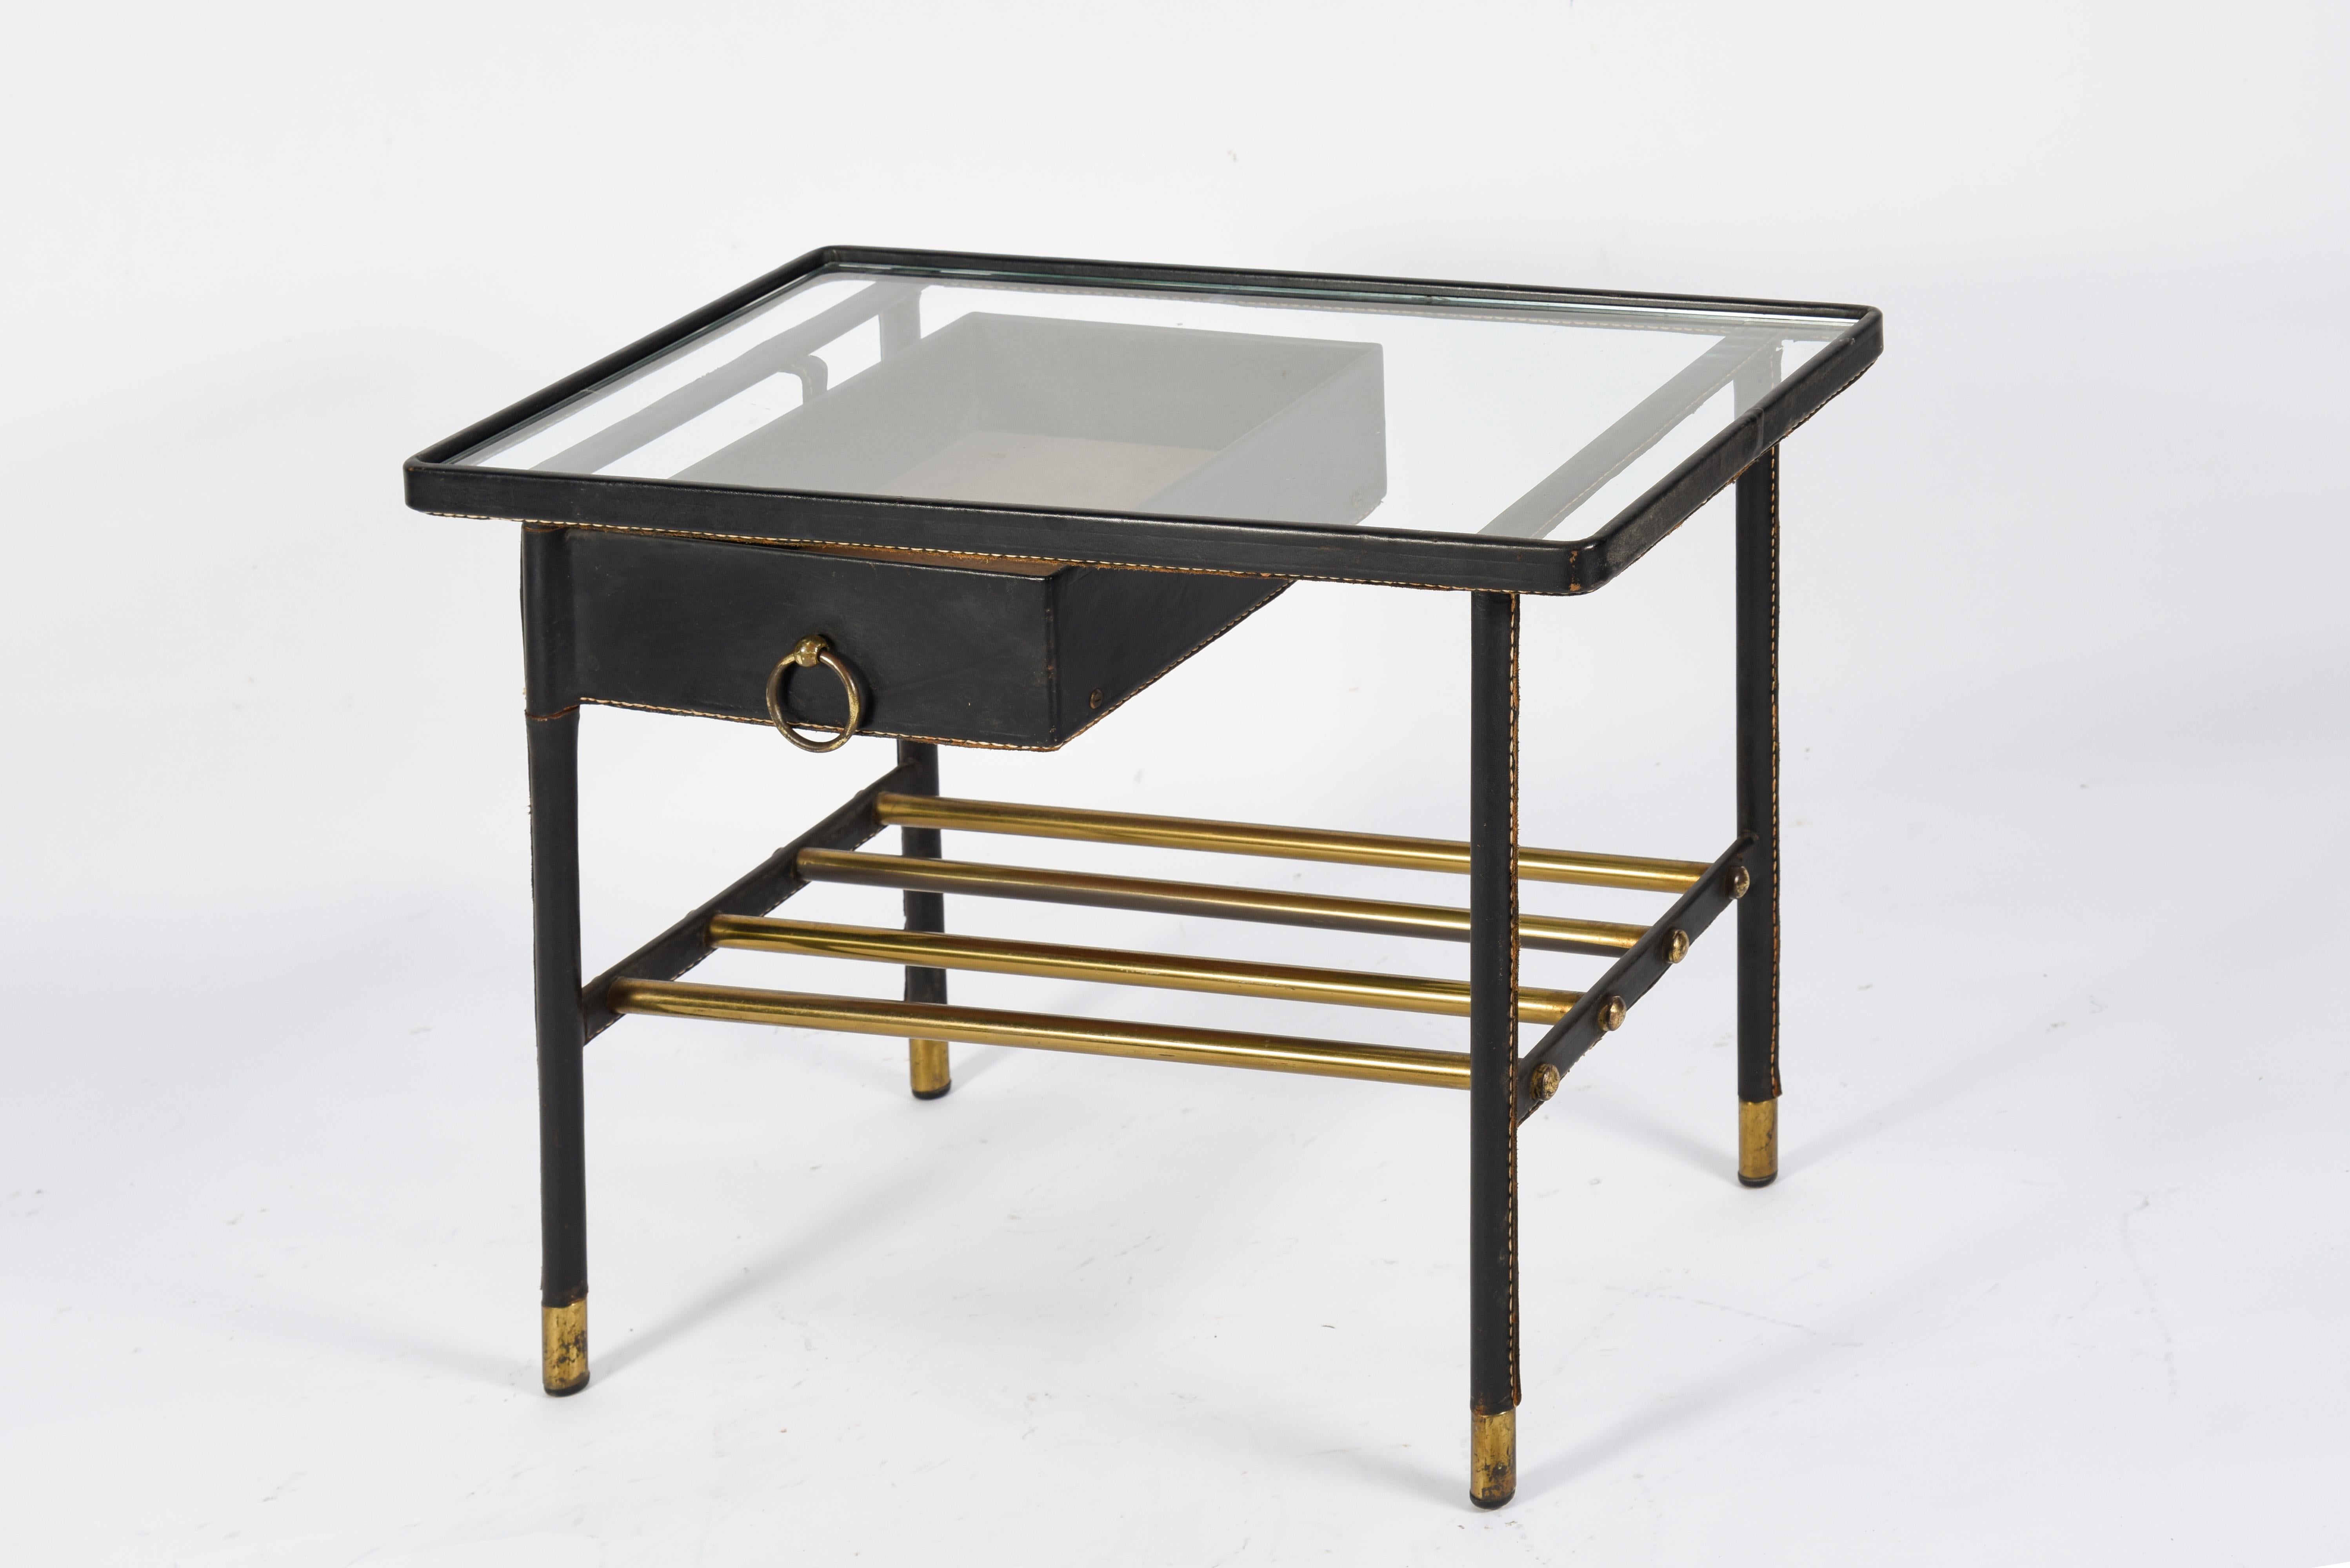 Incredible black leather side table by Jacques Adnet with signature saddle stitched bamboo legs, original glass top and brass loop hardware detailing.
Single drawer pivots with circular brass hardware.
Manufactured by 